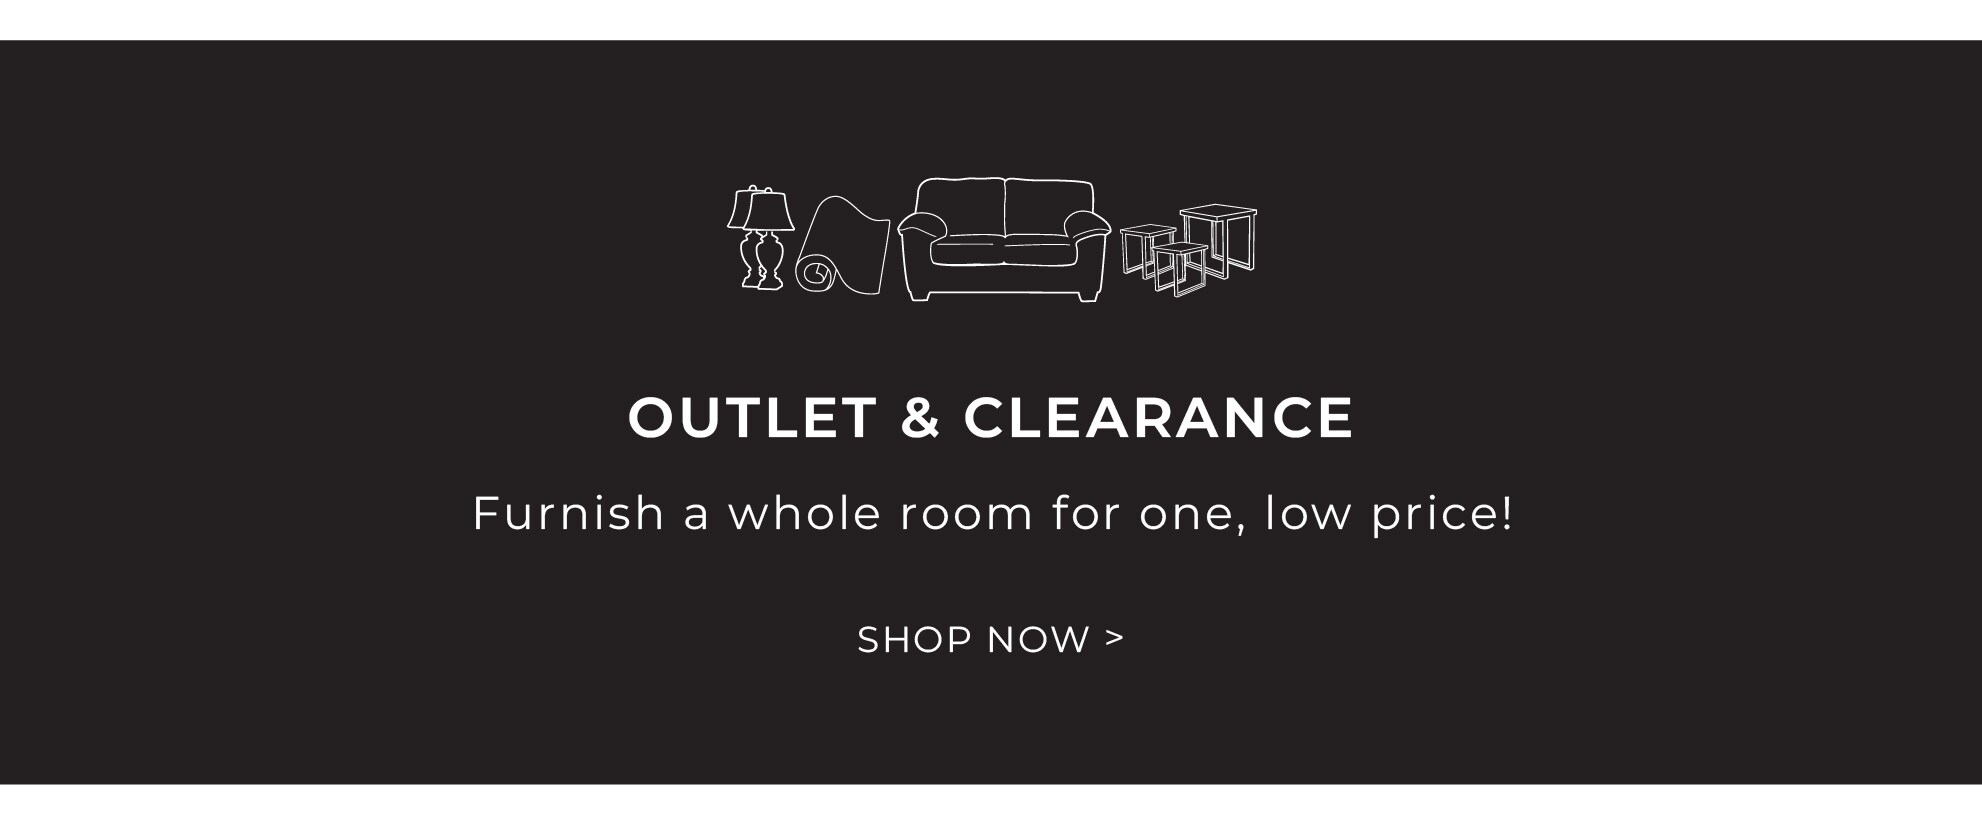 Shop outlet and clearance